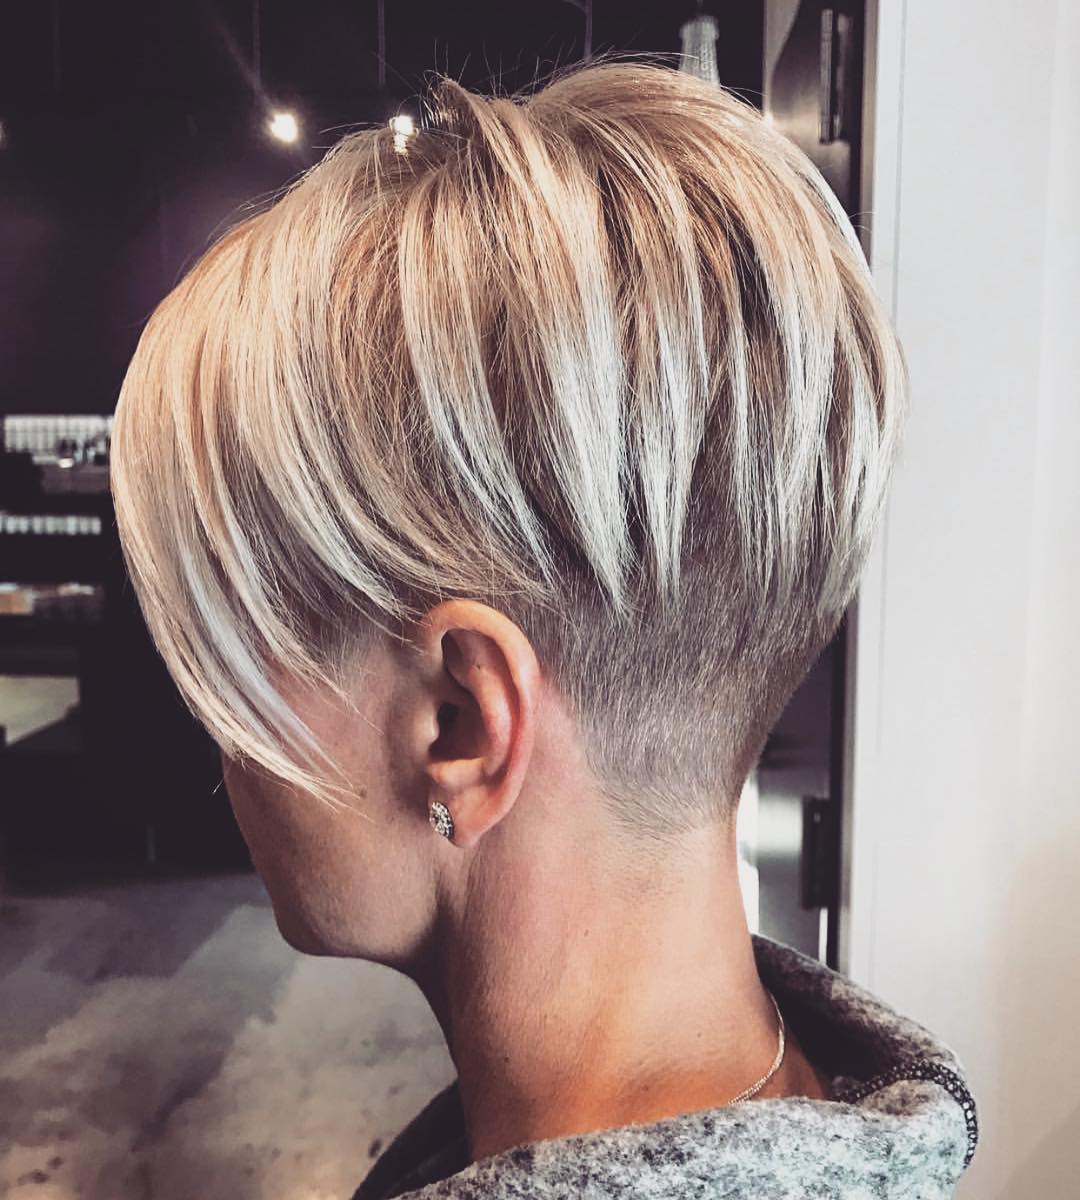 Shaved Pixie Haircuts Stylish Short Haircut For Women 2 